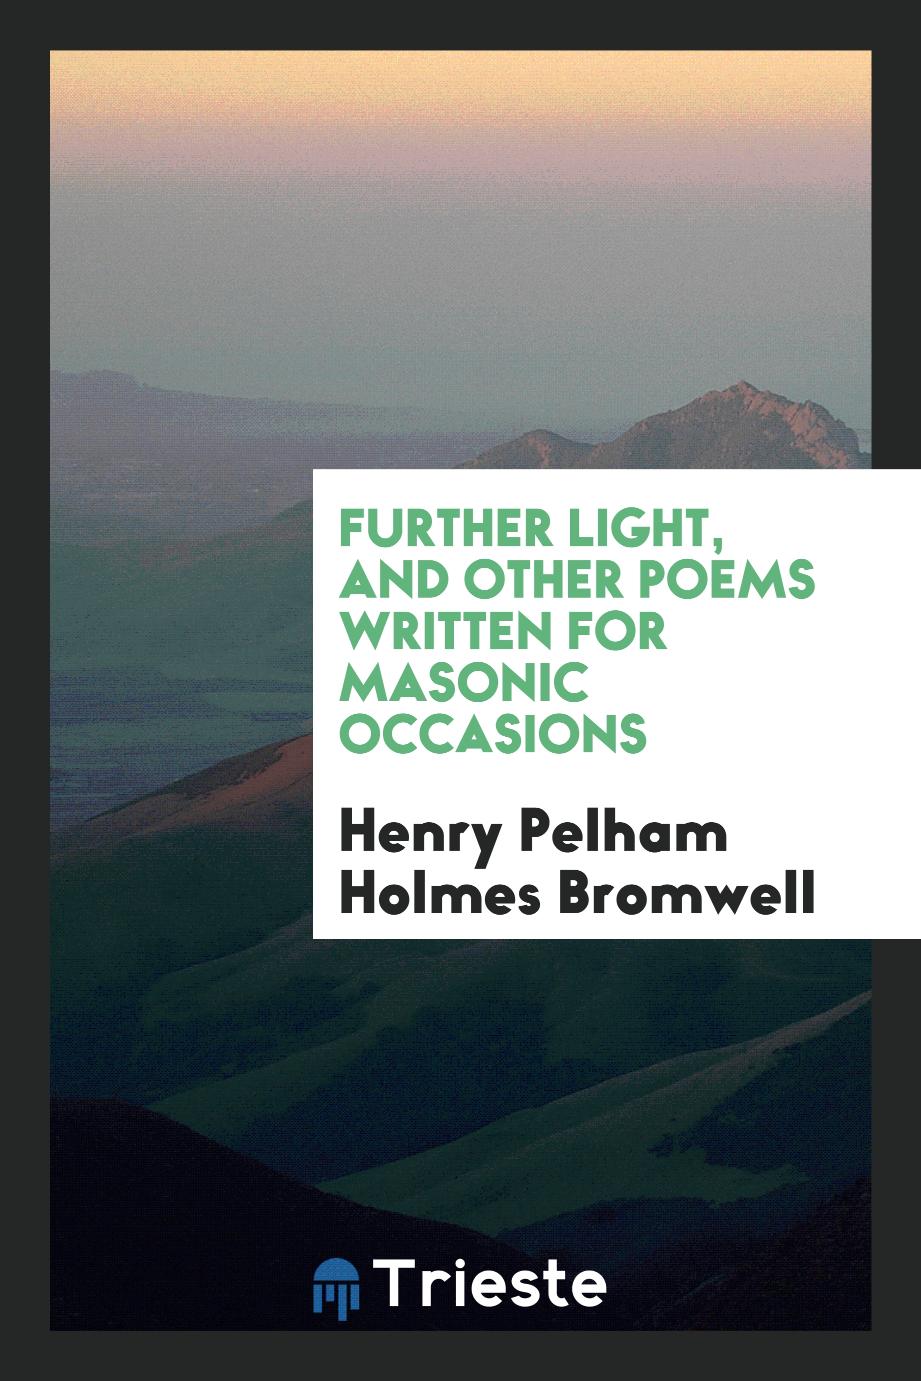 Further light, and other poems written for Masonic occasions